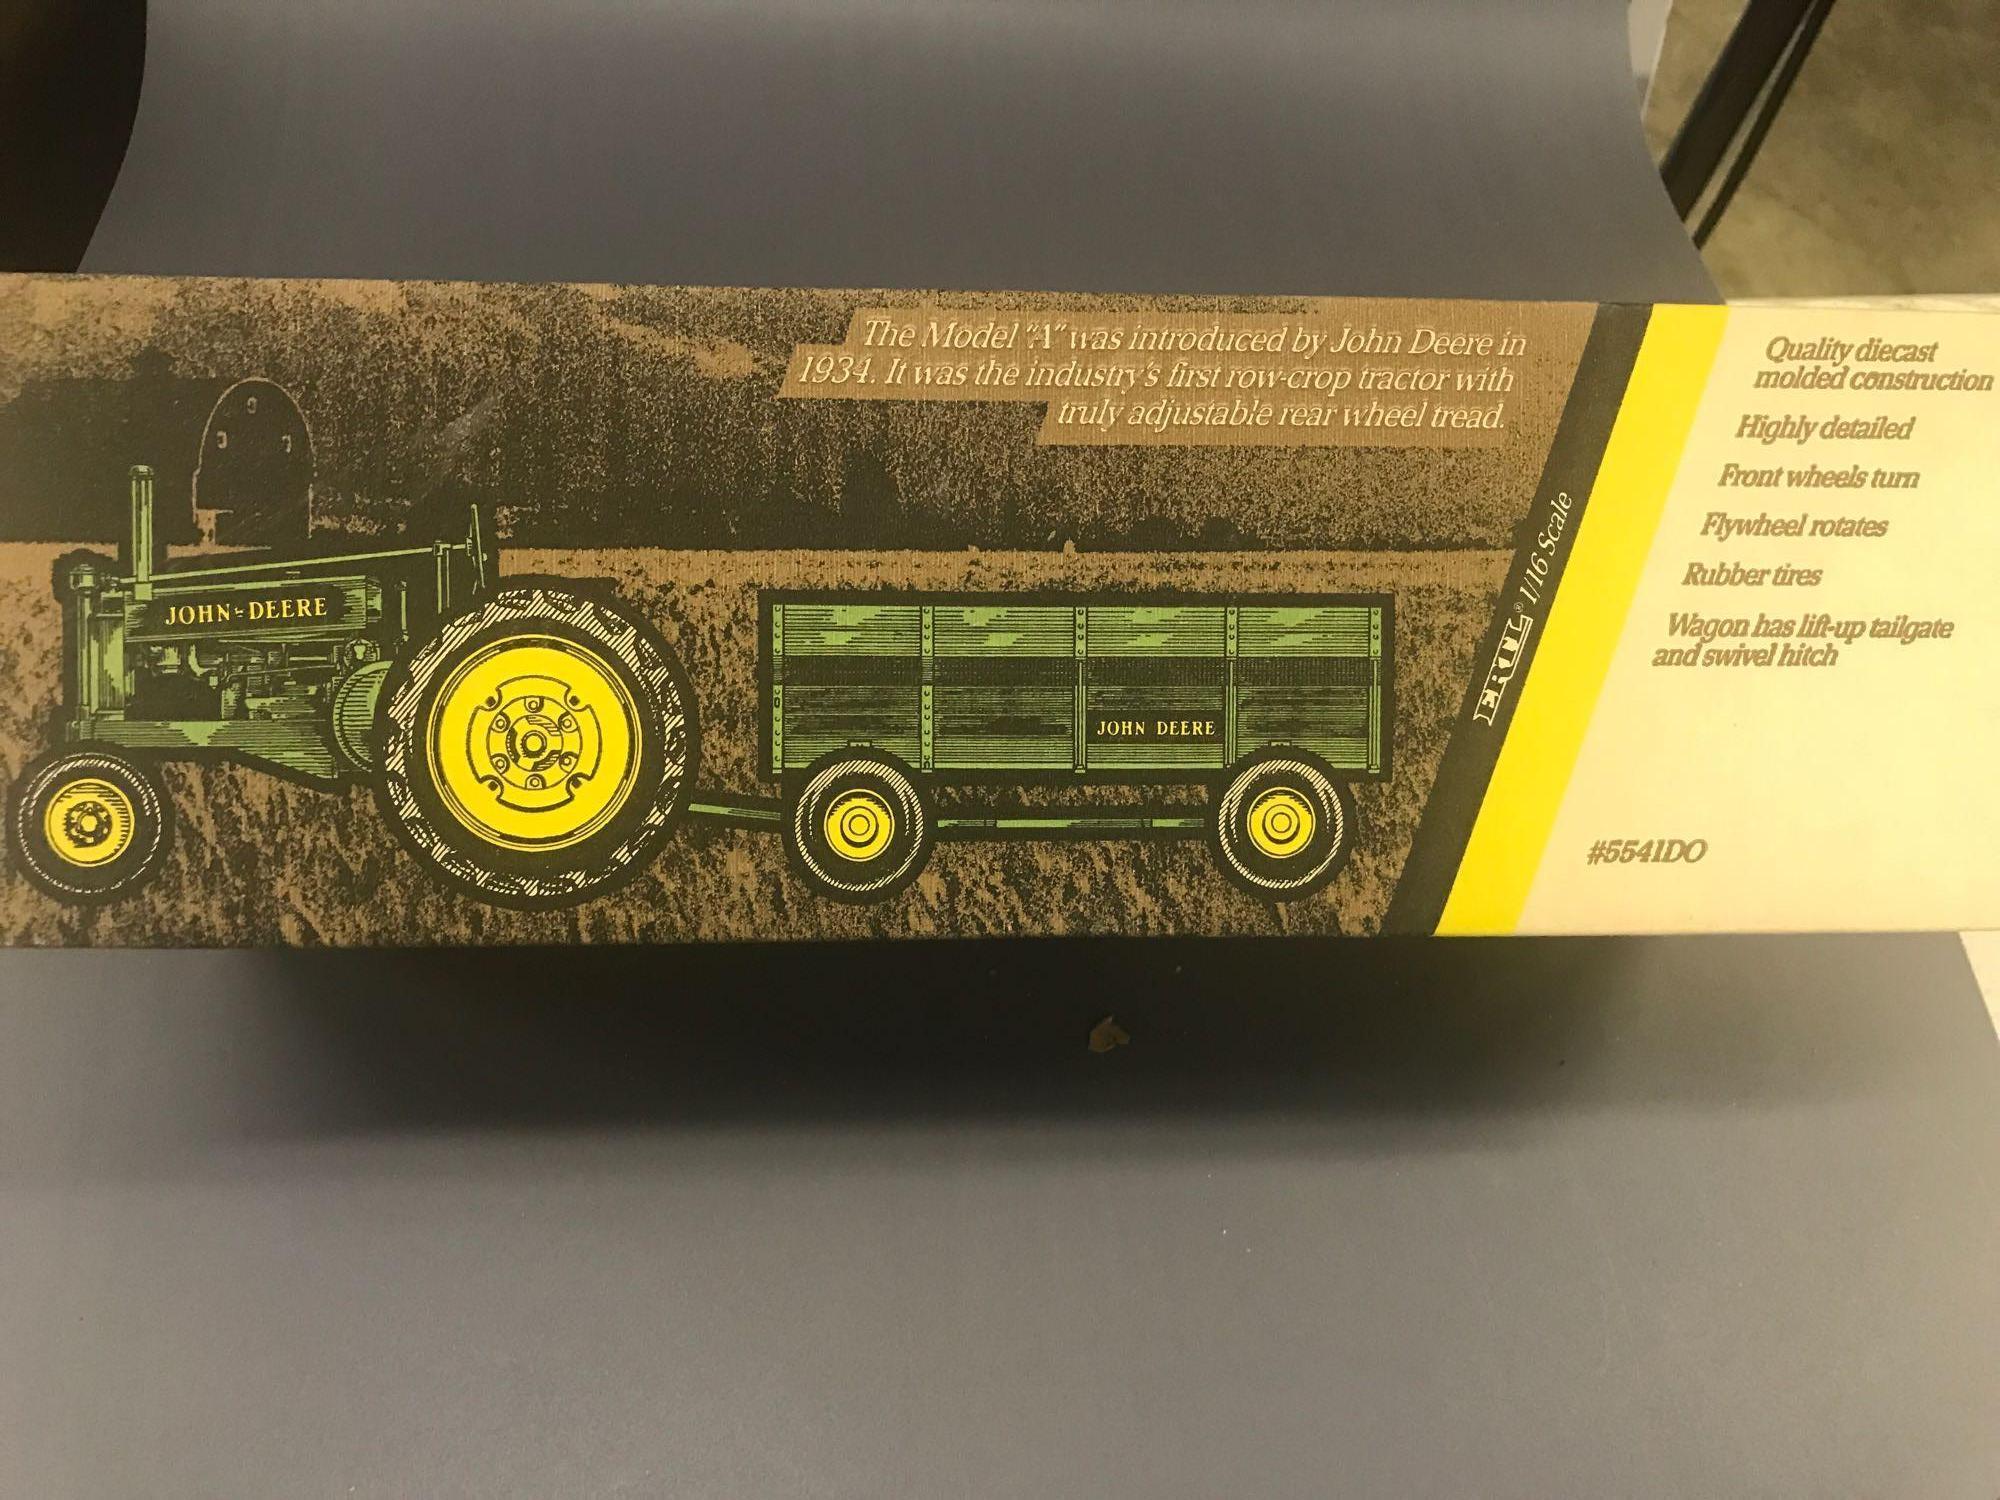 1/16 Scale 1934 JD A Tractor and Wagon Set - NIB